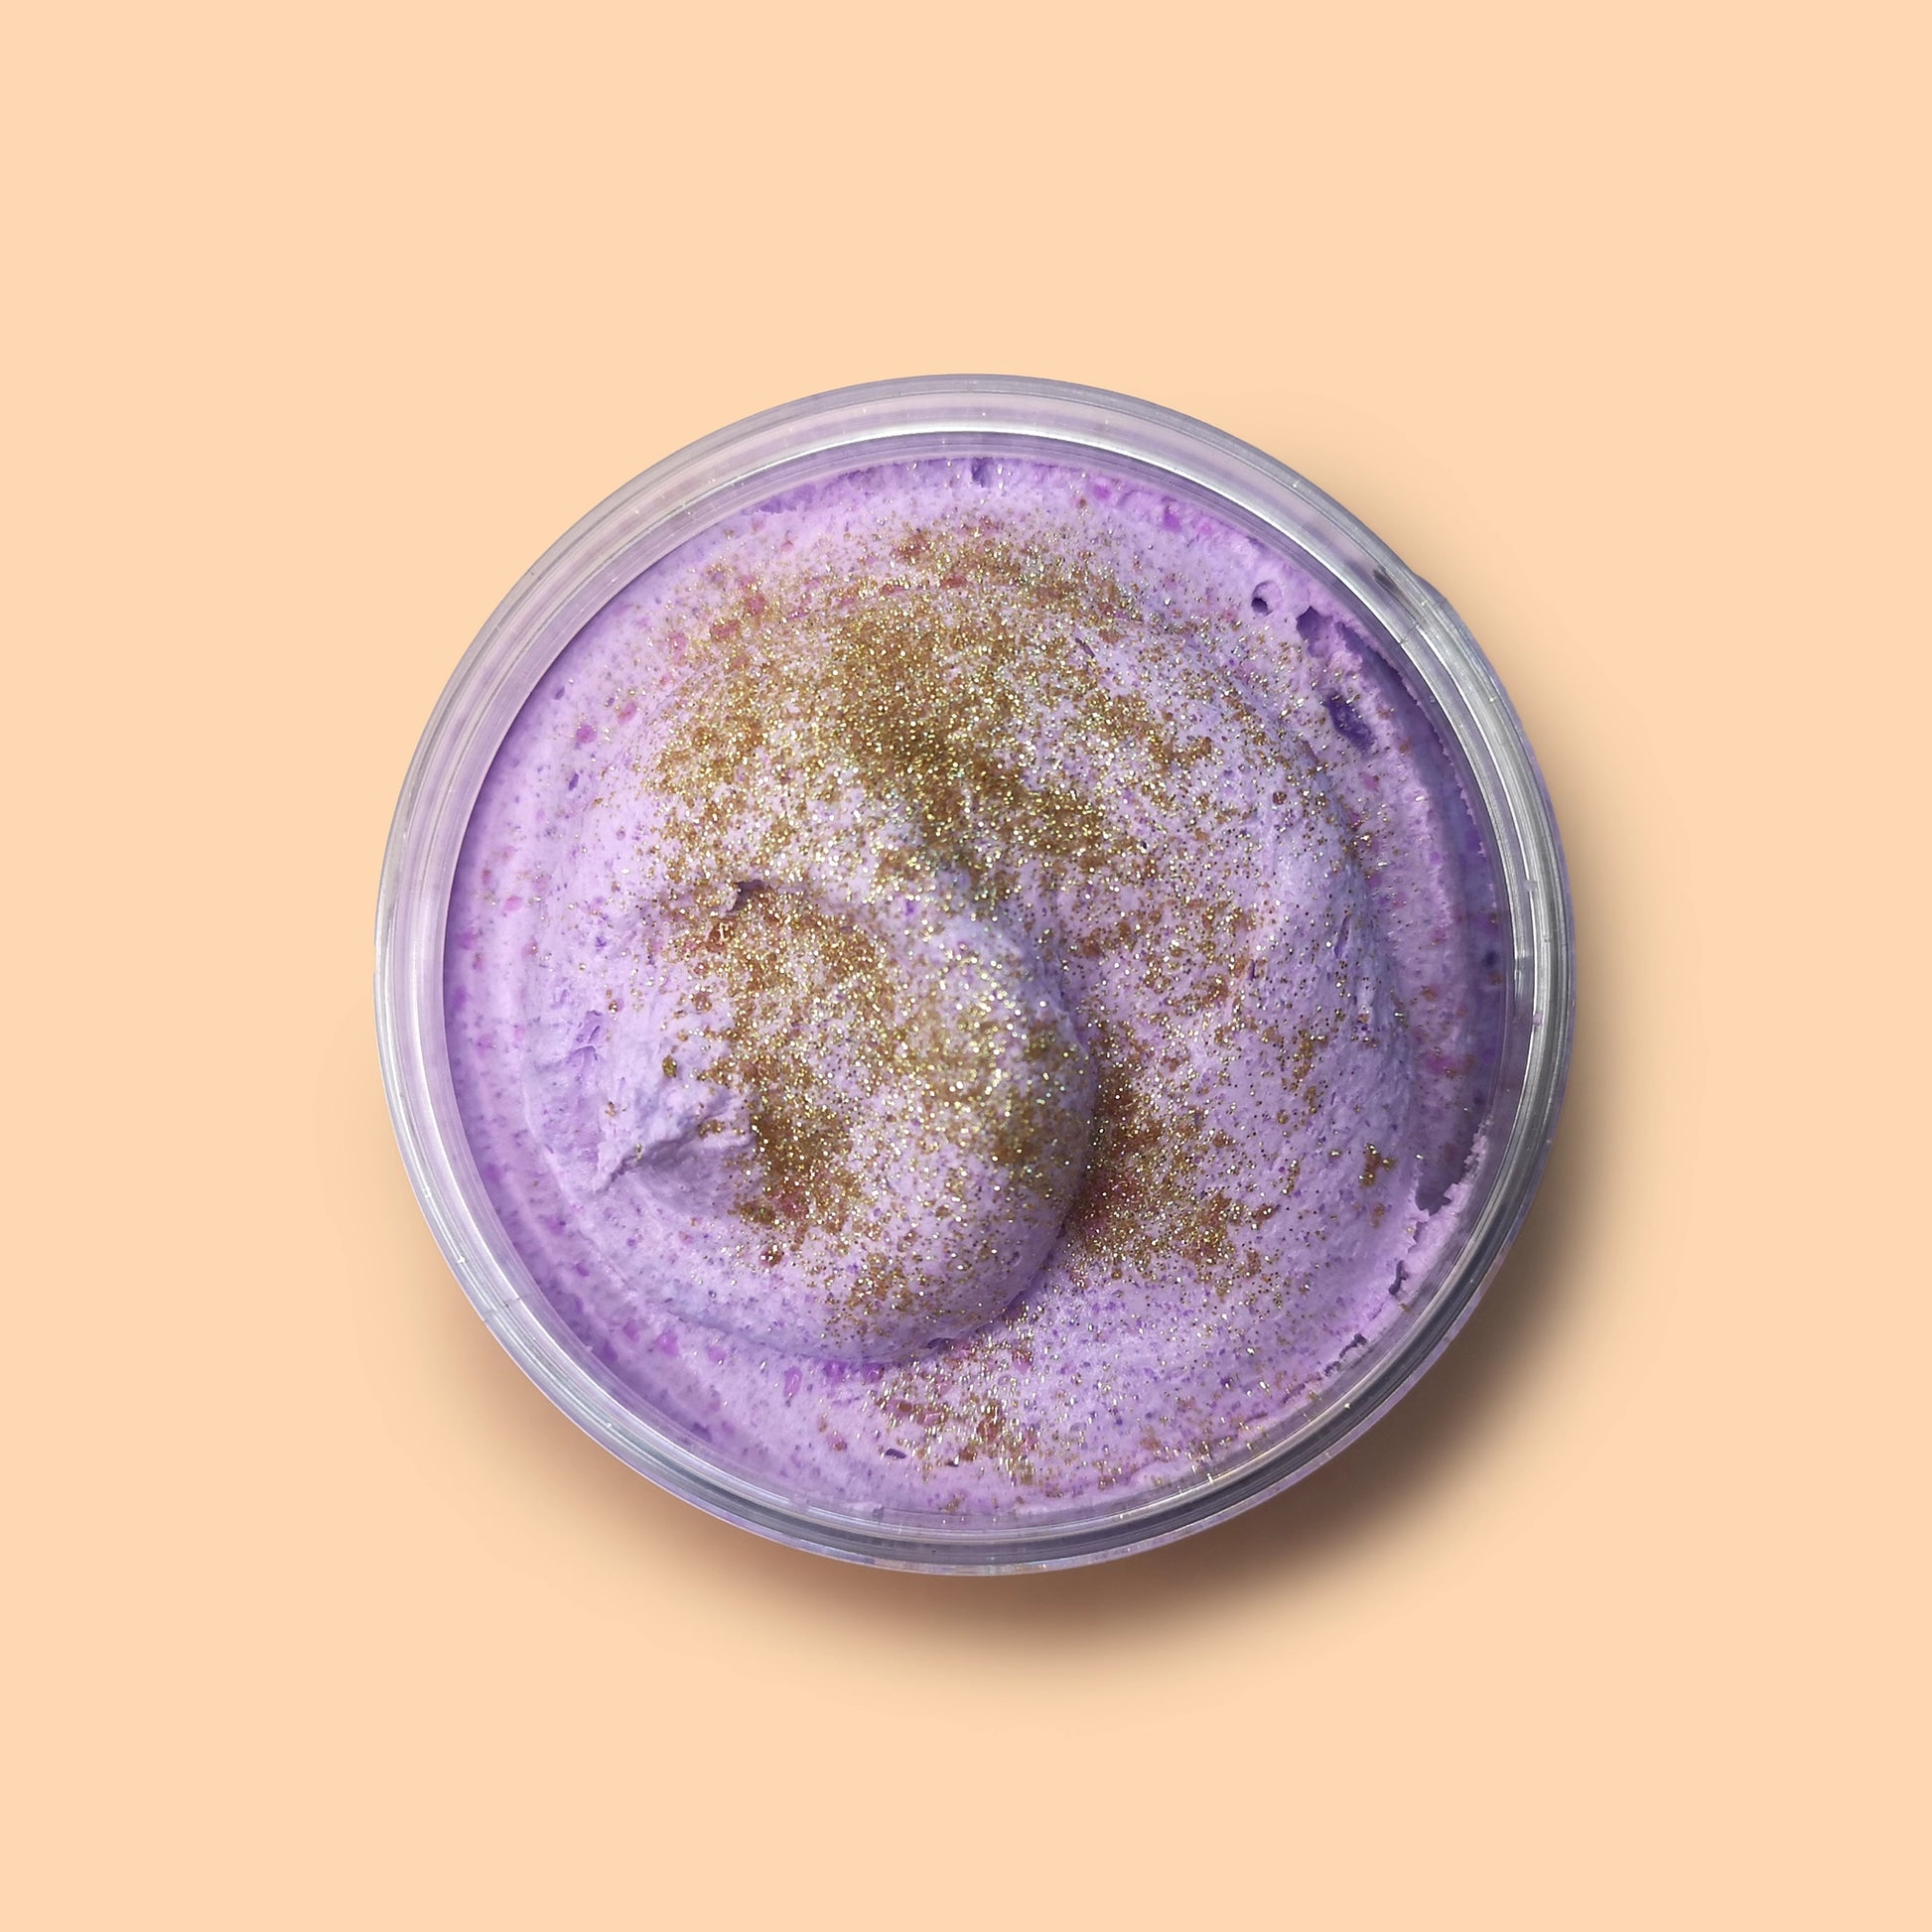 Persian Skies fig and pomegranate whipped soap body scrub texture